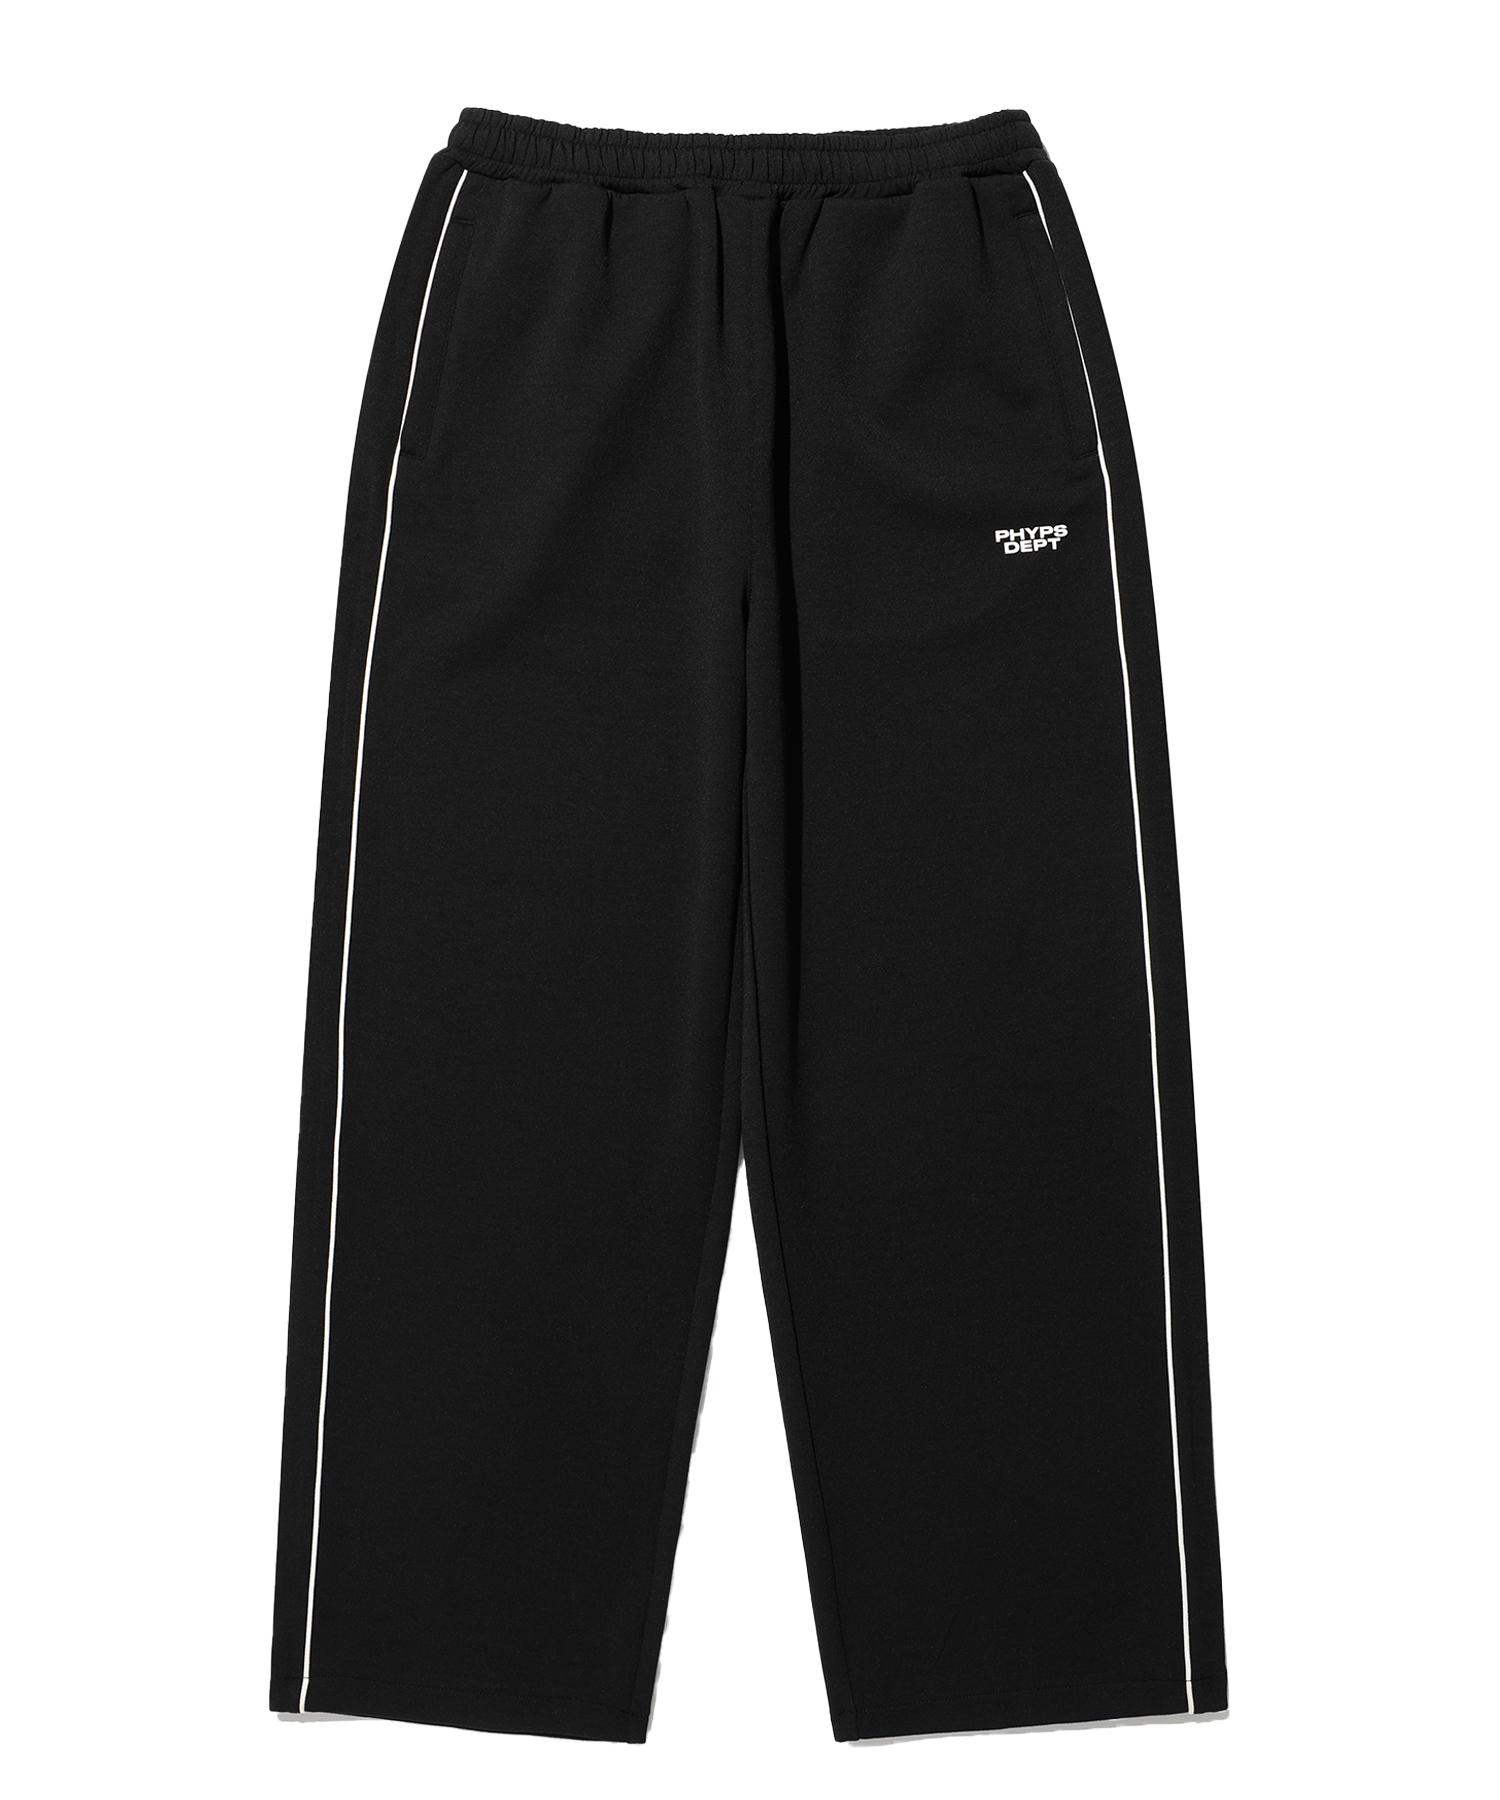 PHYPS® PIPING JERSEY TRACK PANTS BLACK